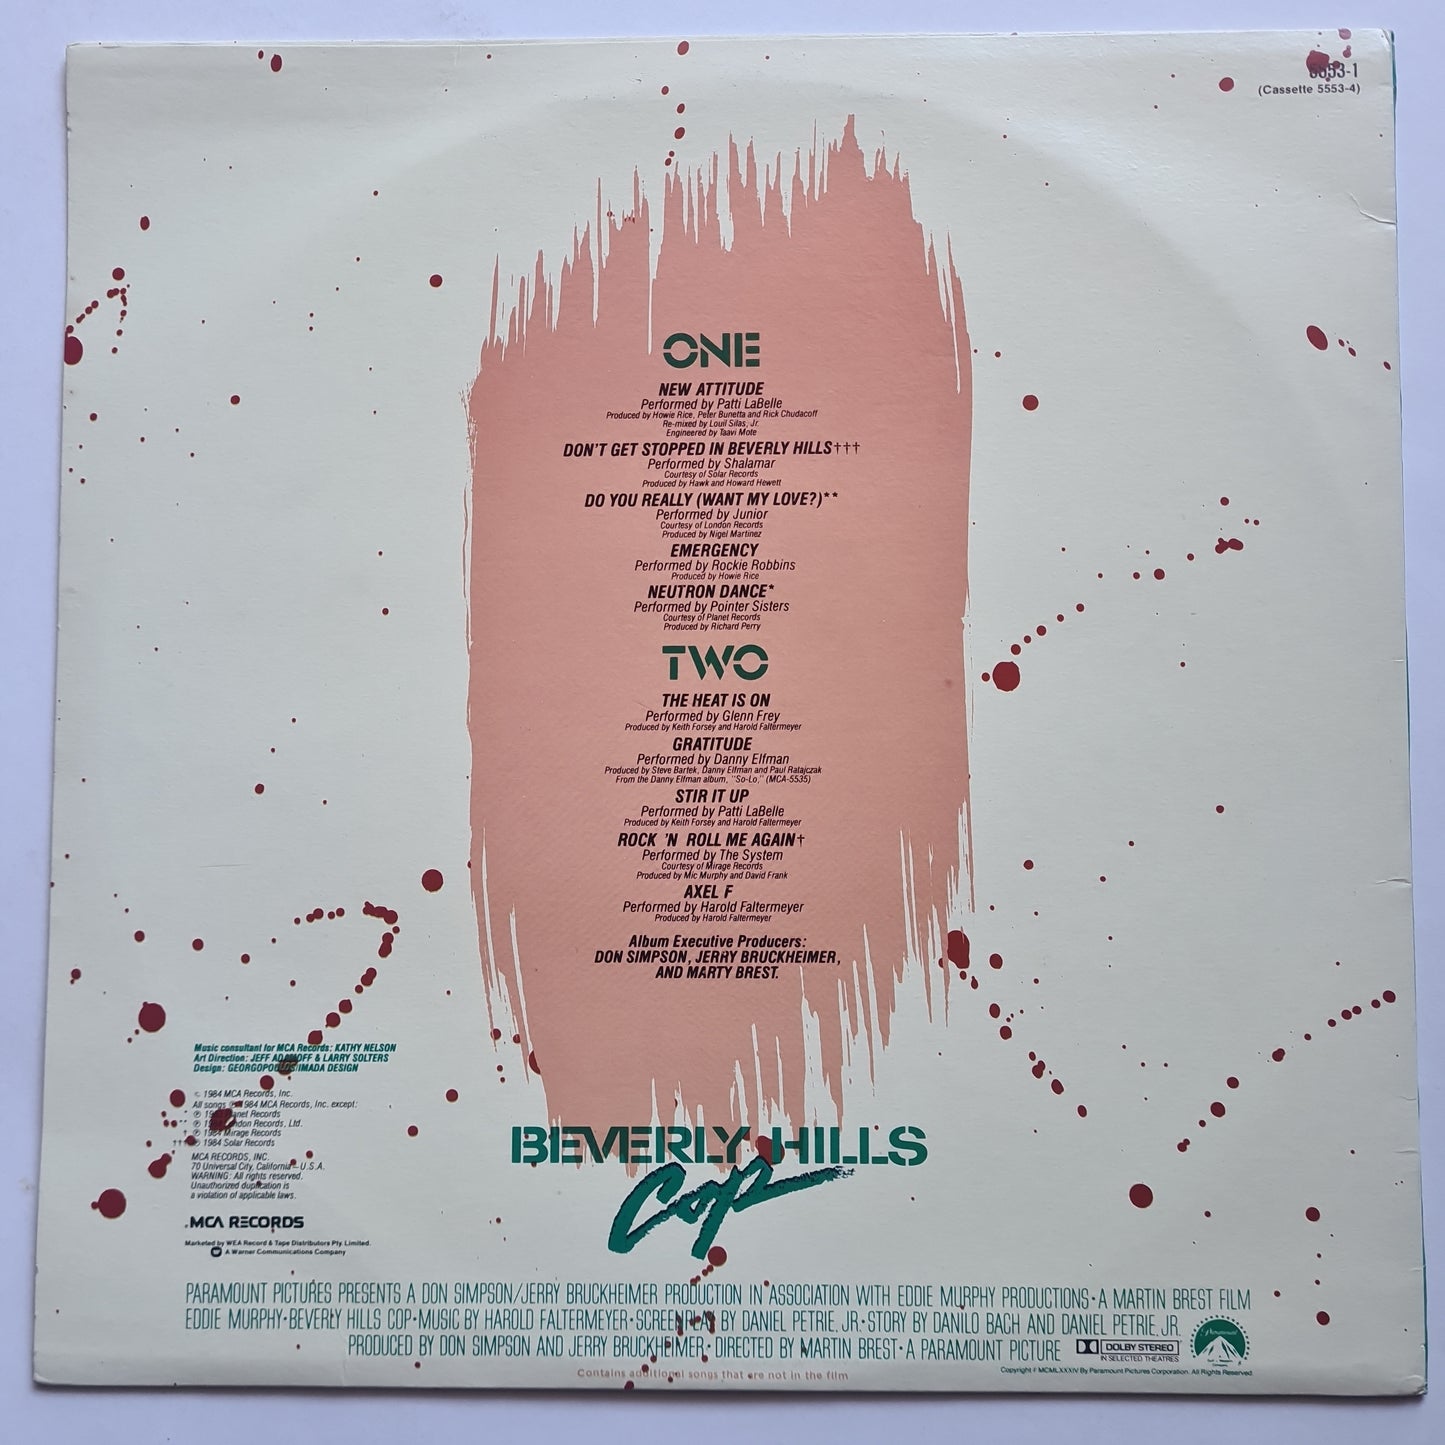 Various – Music From The Motion Picture Soundtrack - Beverly Hills Cop - 1985 - Vinyl Record